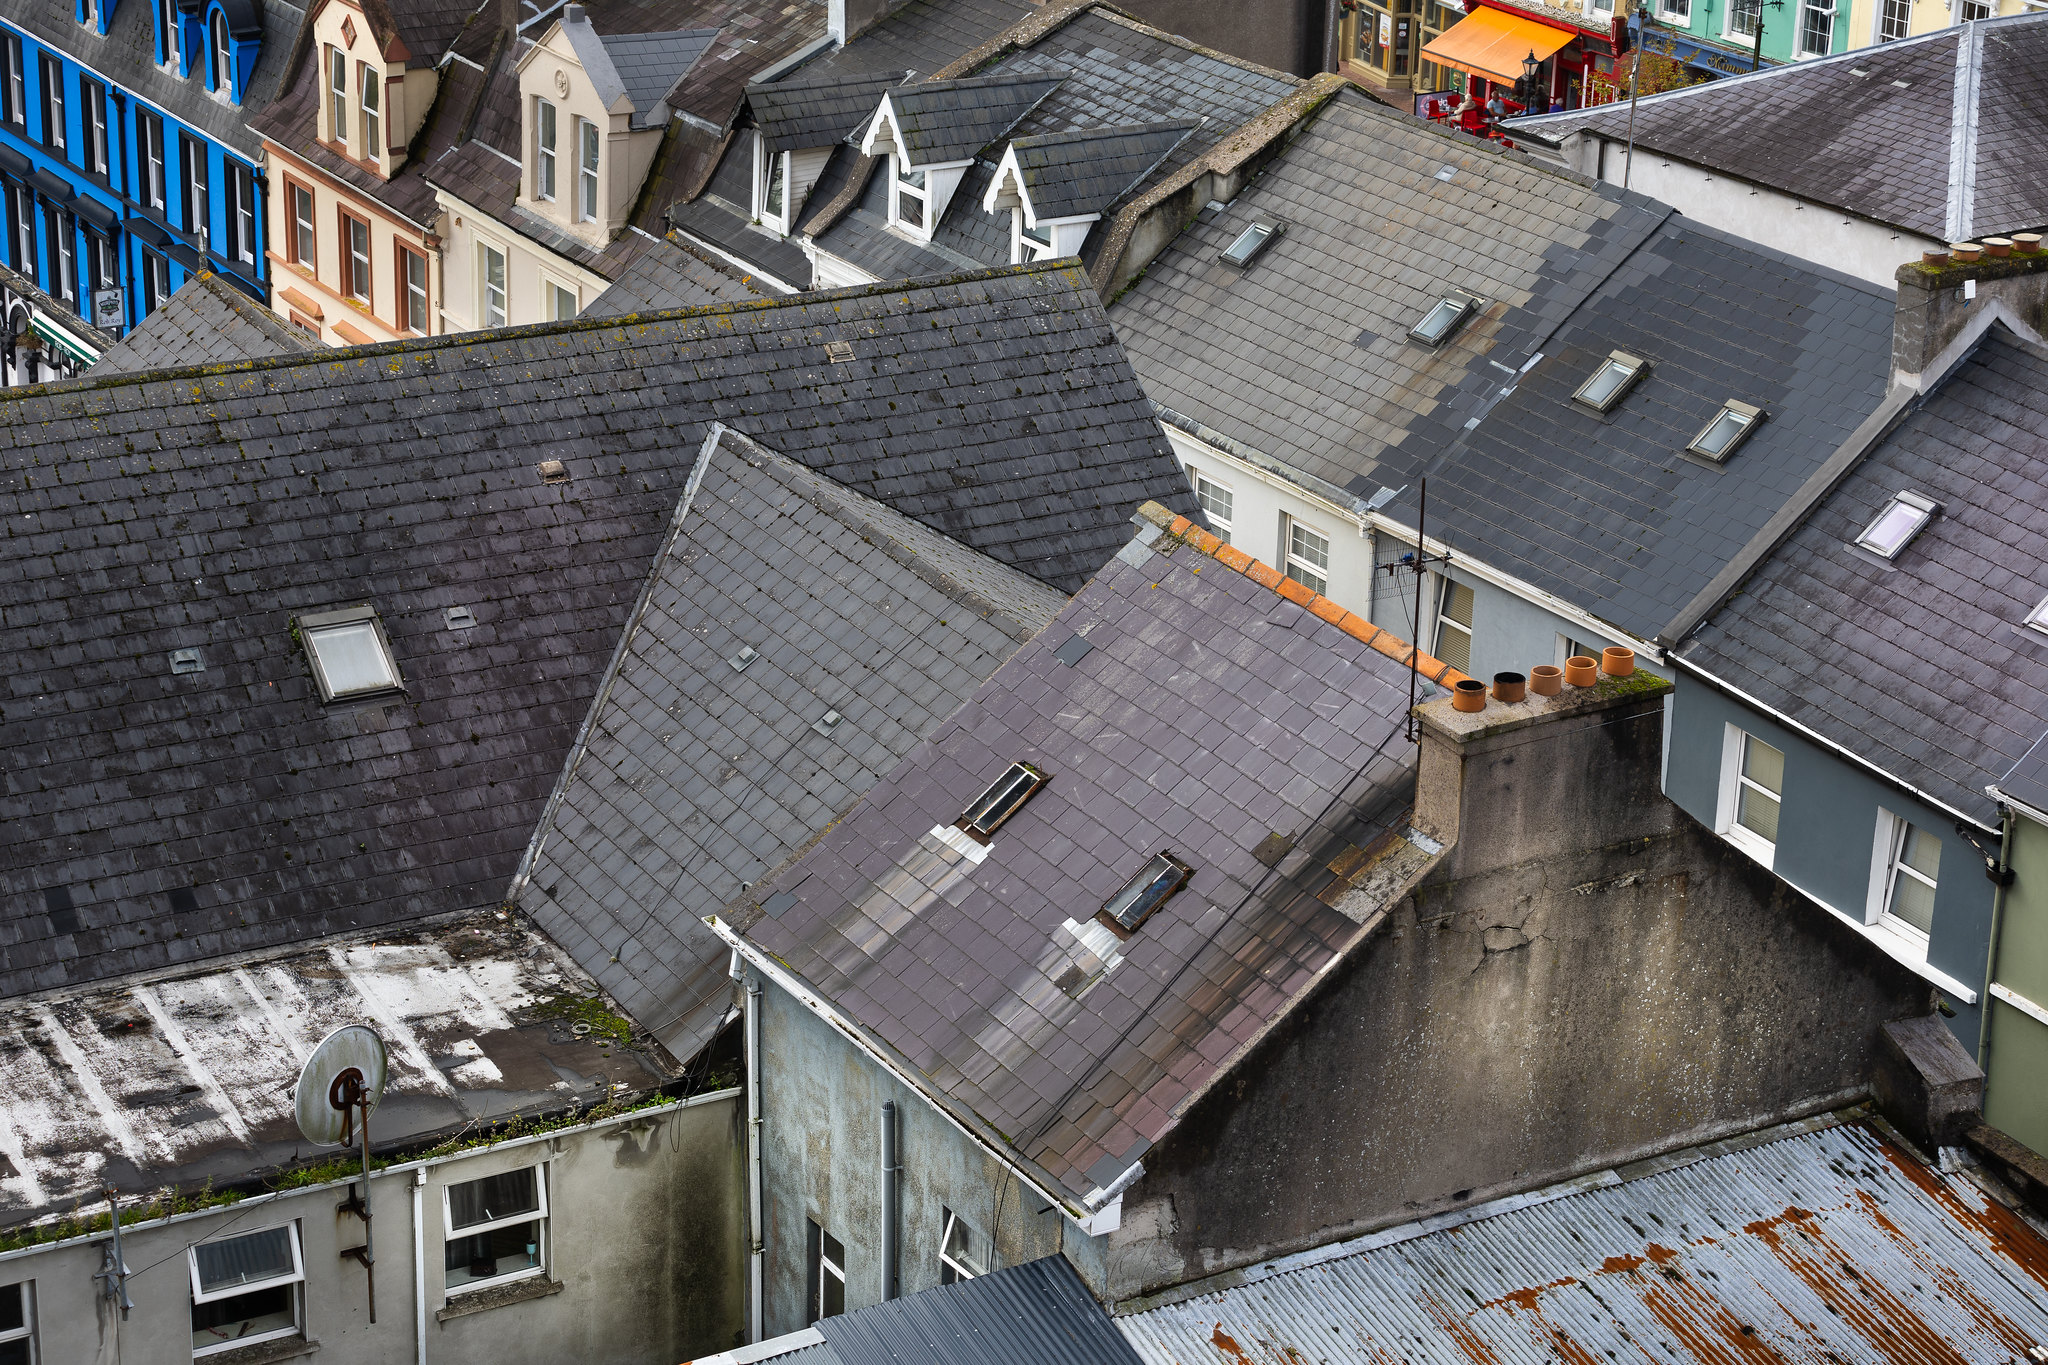 Cobh roofs